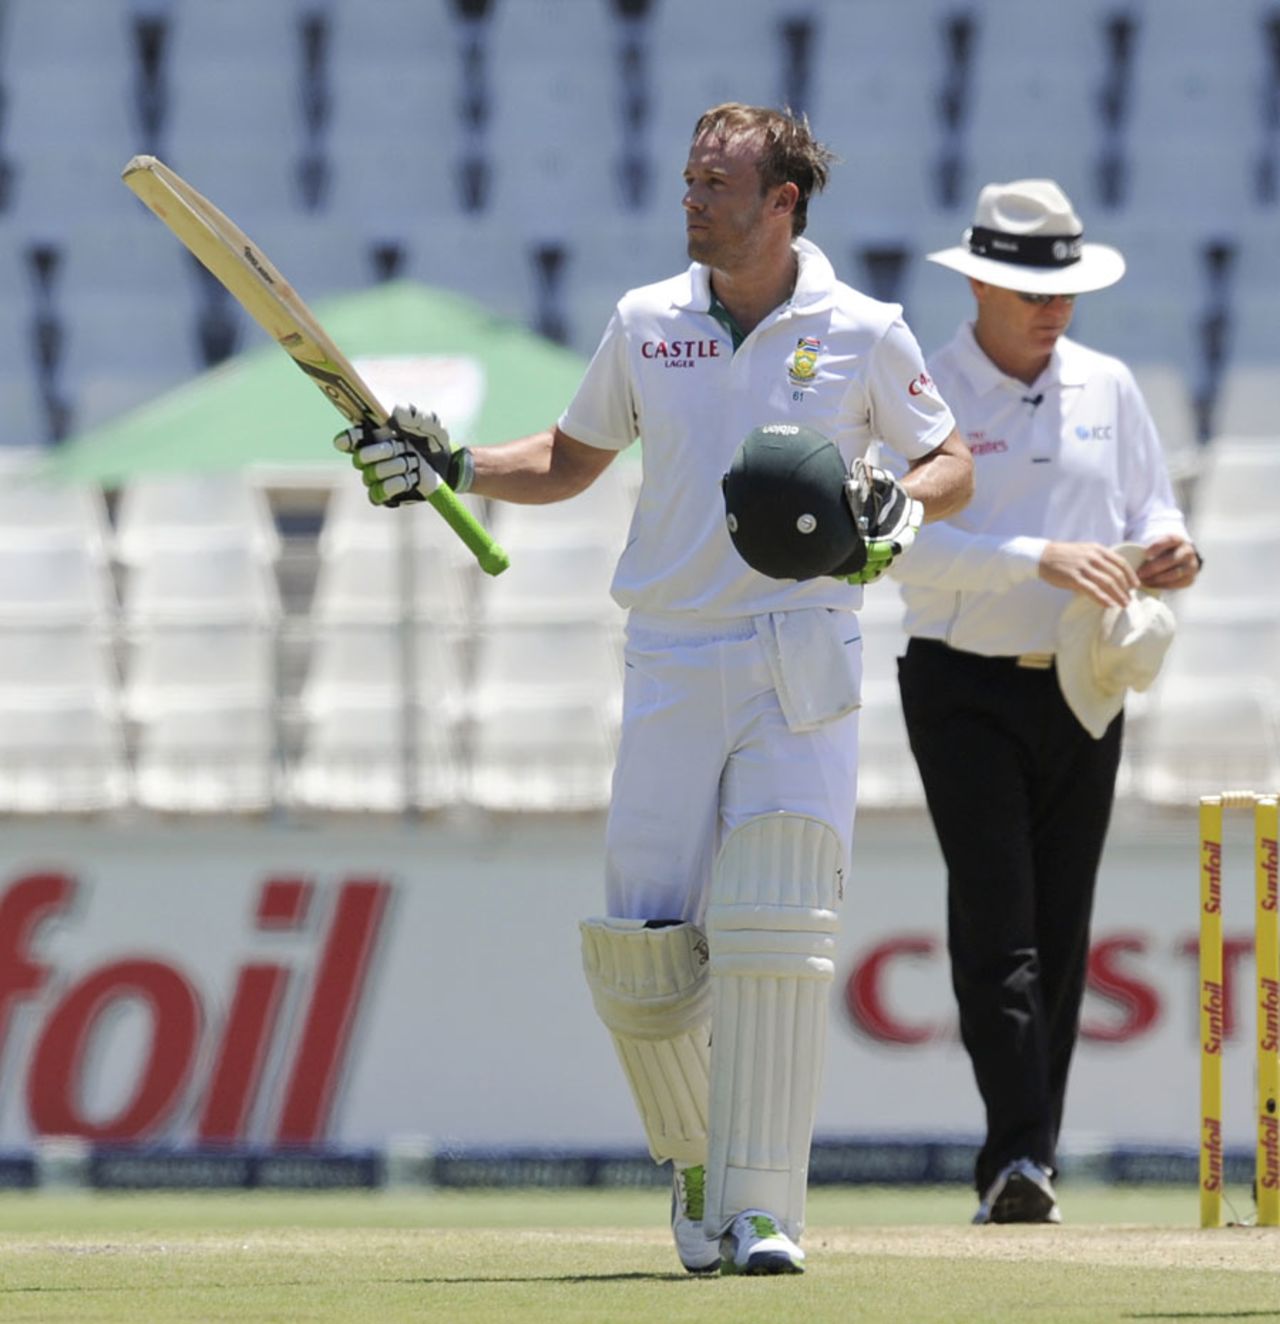 AB de Villiers made his 15th Test hundred, South Africa v Pakistan, 1st Test, Johannesburg, 3rd day, February 3, 2012